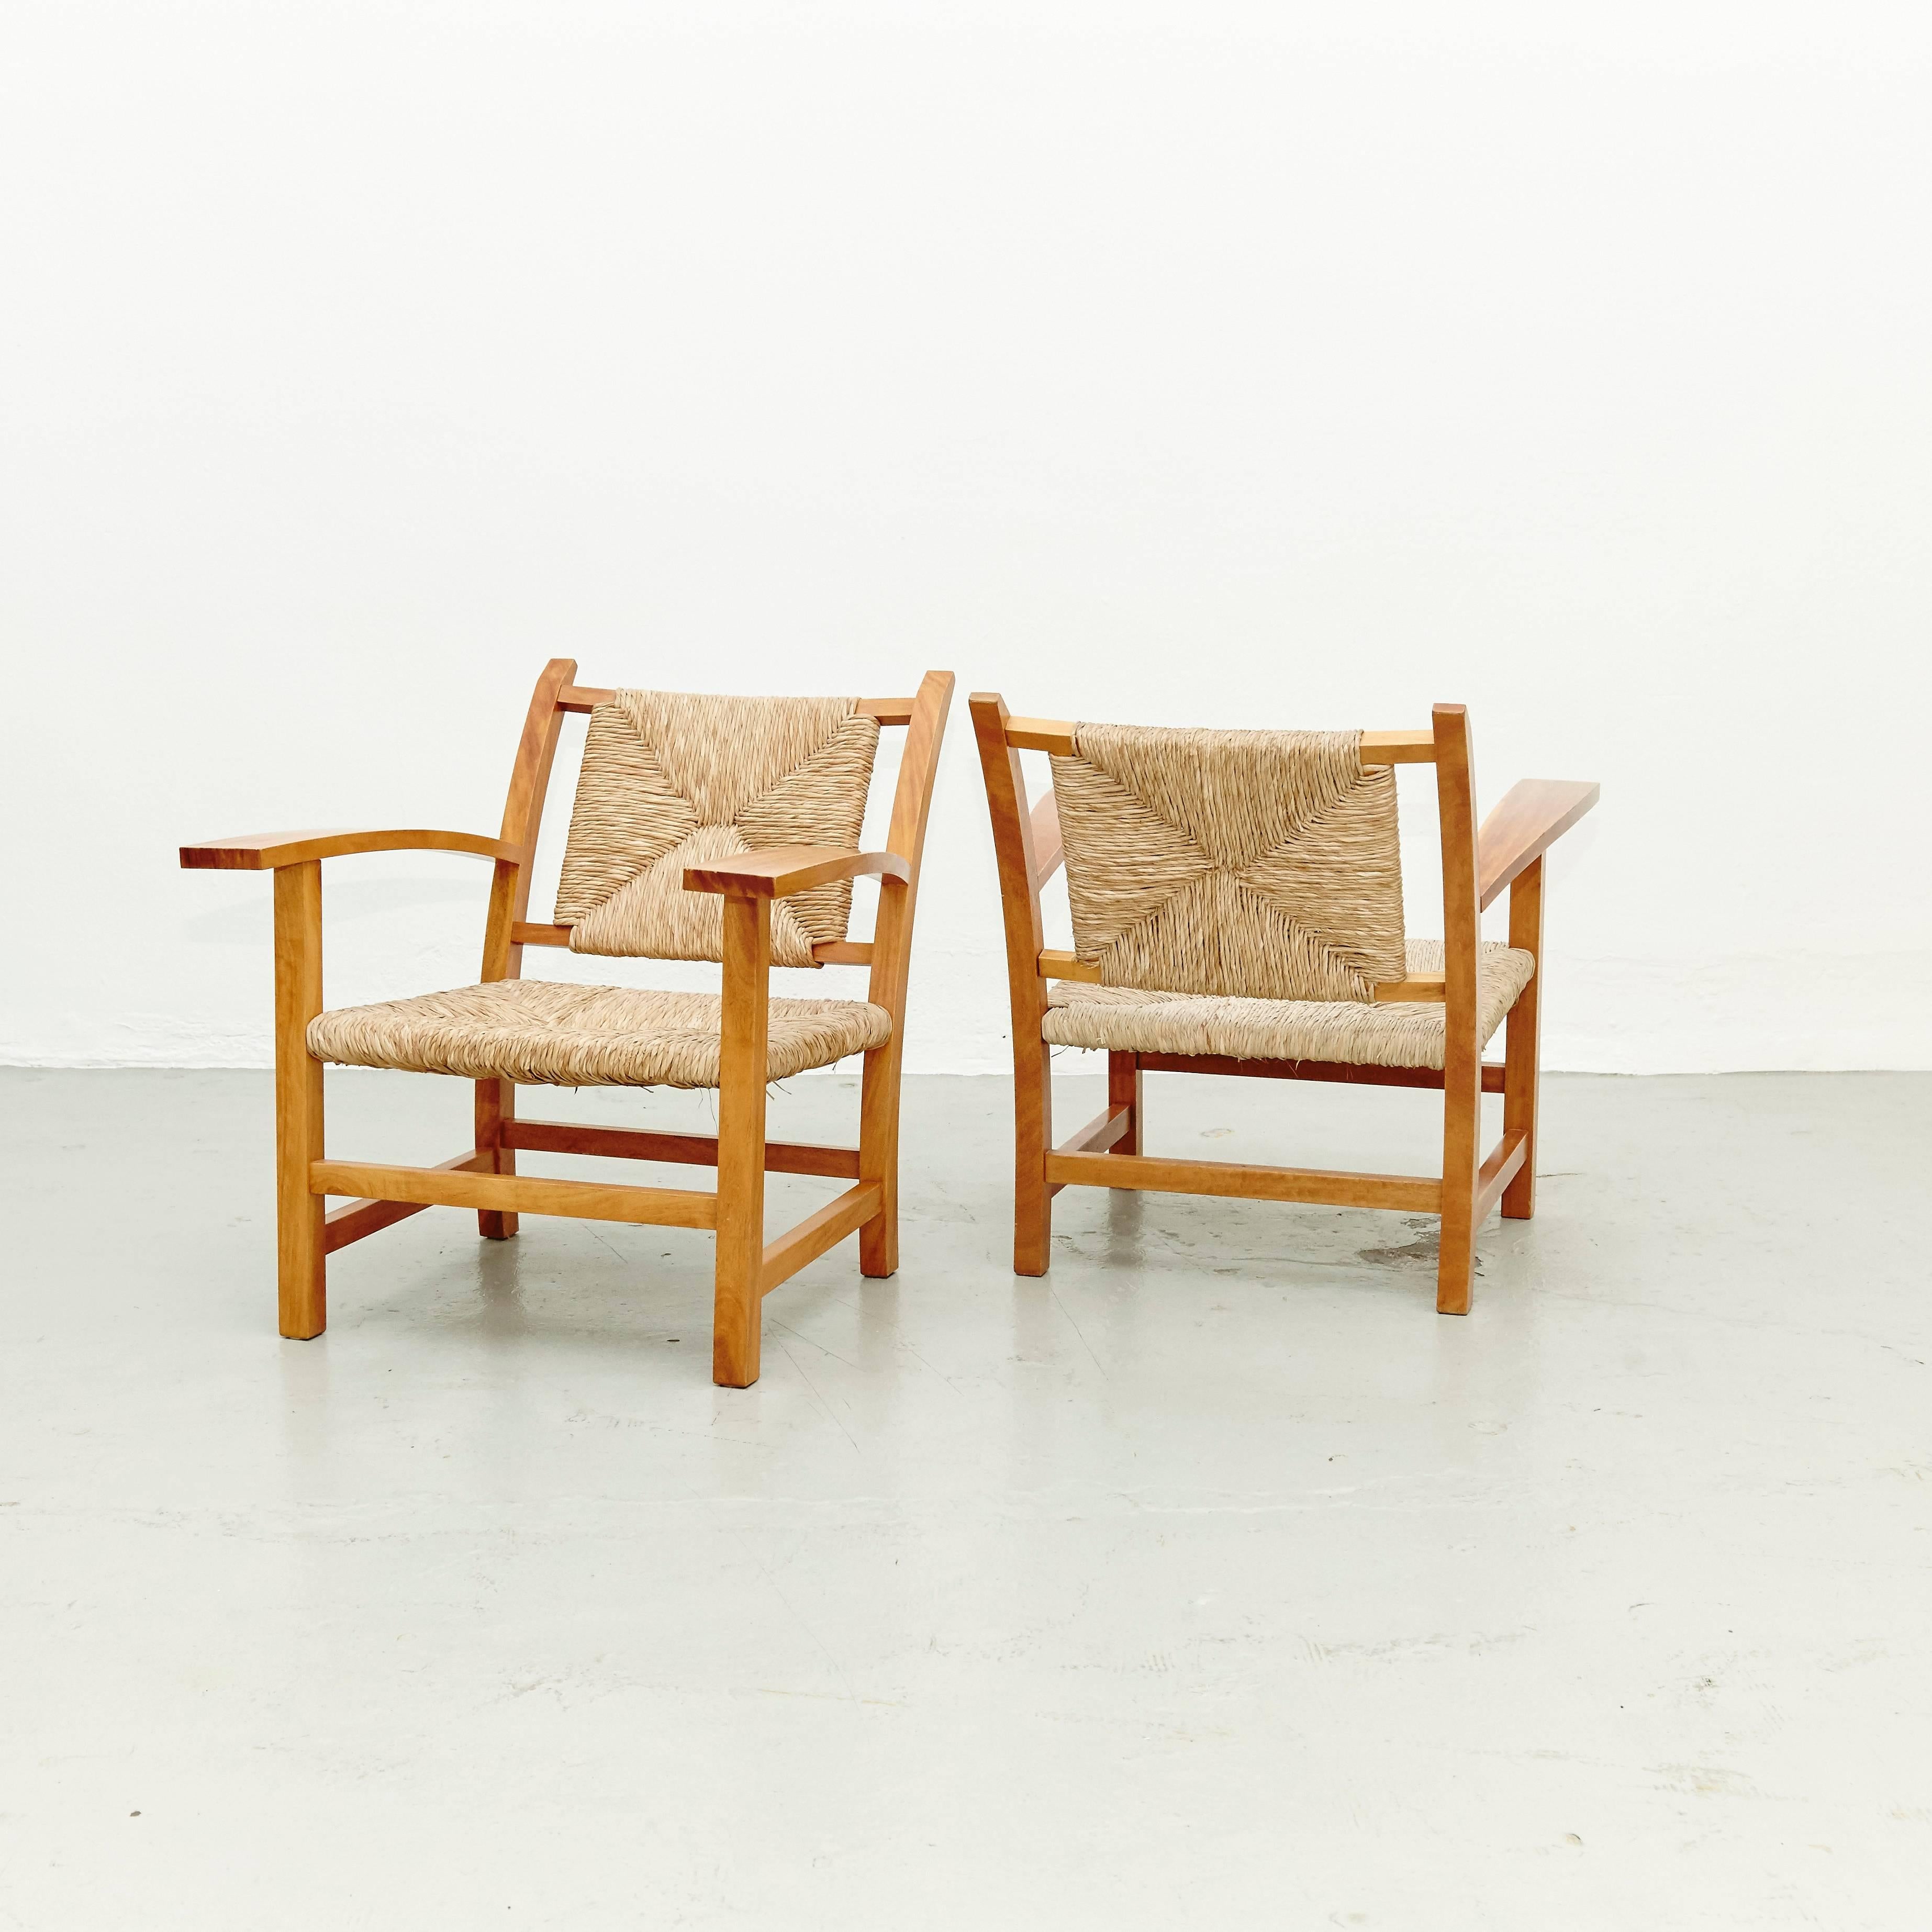 Armchair designed by Josep Torres Clave in 1934.
Manufactured in Spain, circa 1950.
Oak structure and rattan.

In great original condition, with minor wear consistent with age and use, preserving a beautiful patina.

The architect Josep Torres